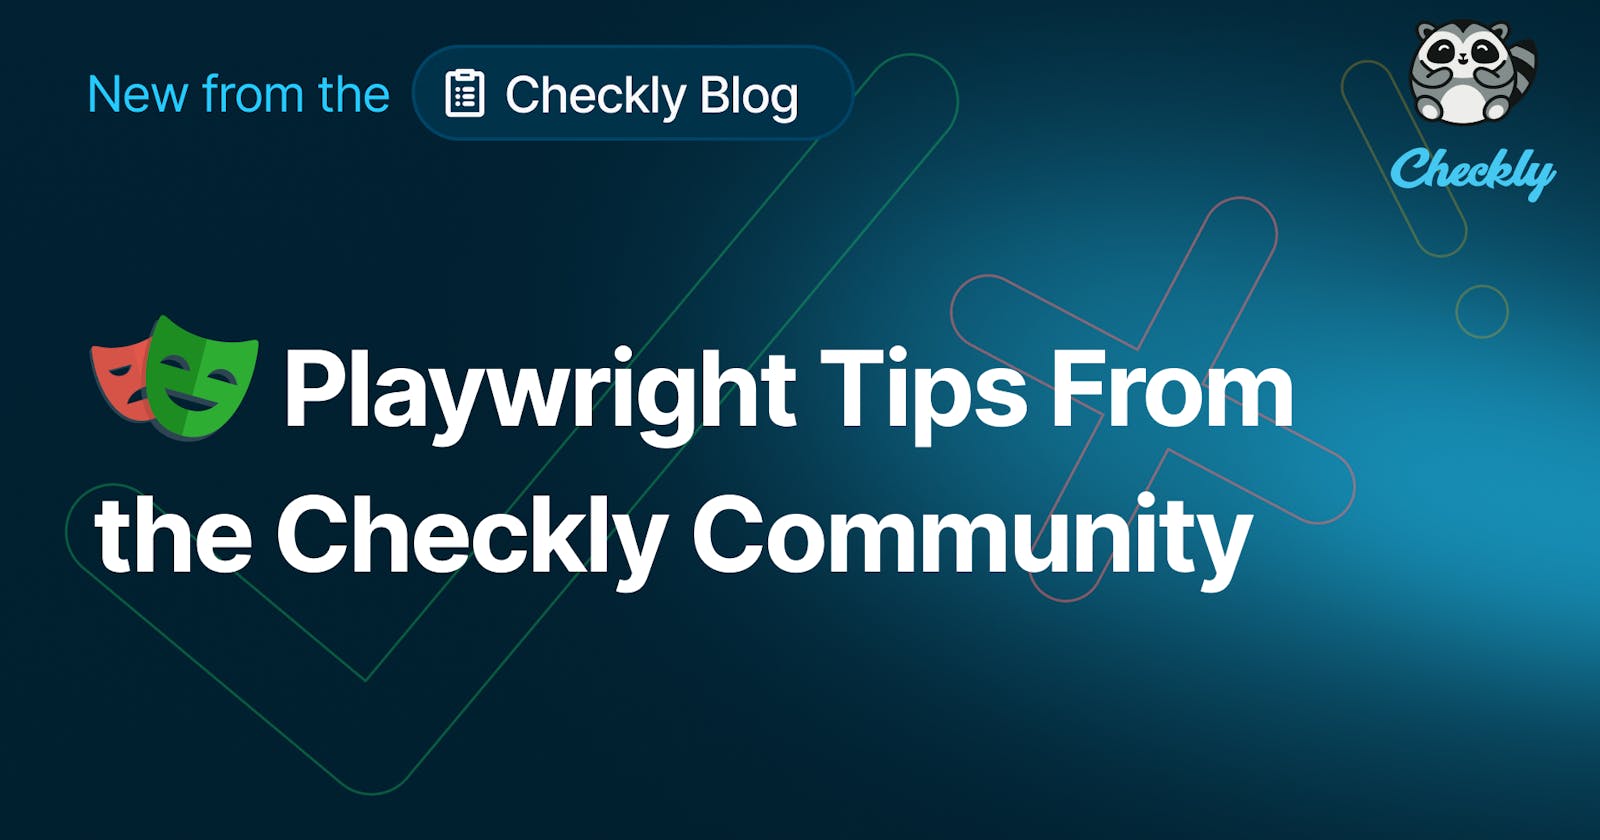 Playwright Tips From the Checkly Community